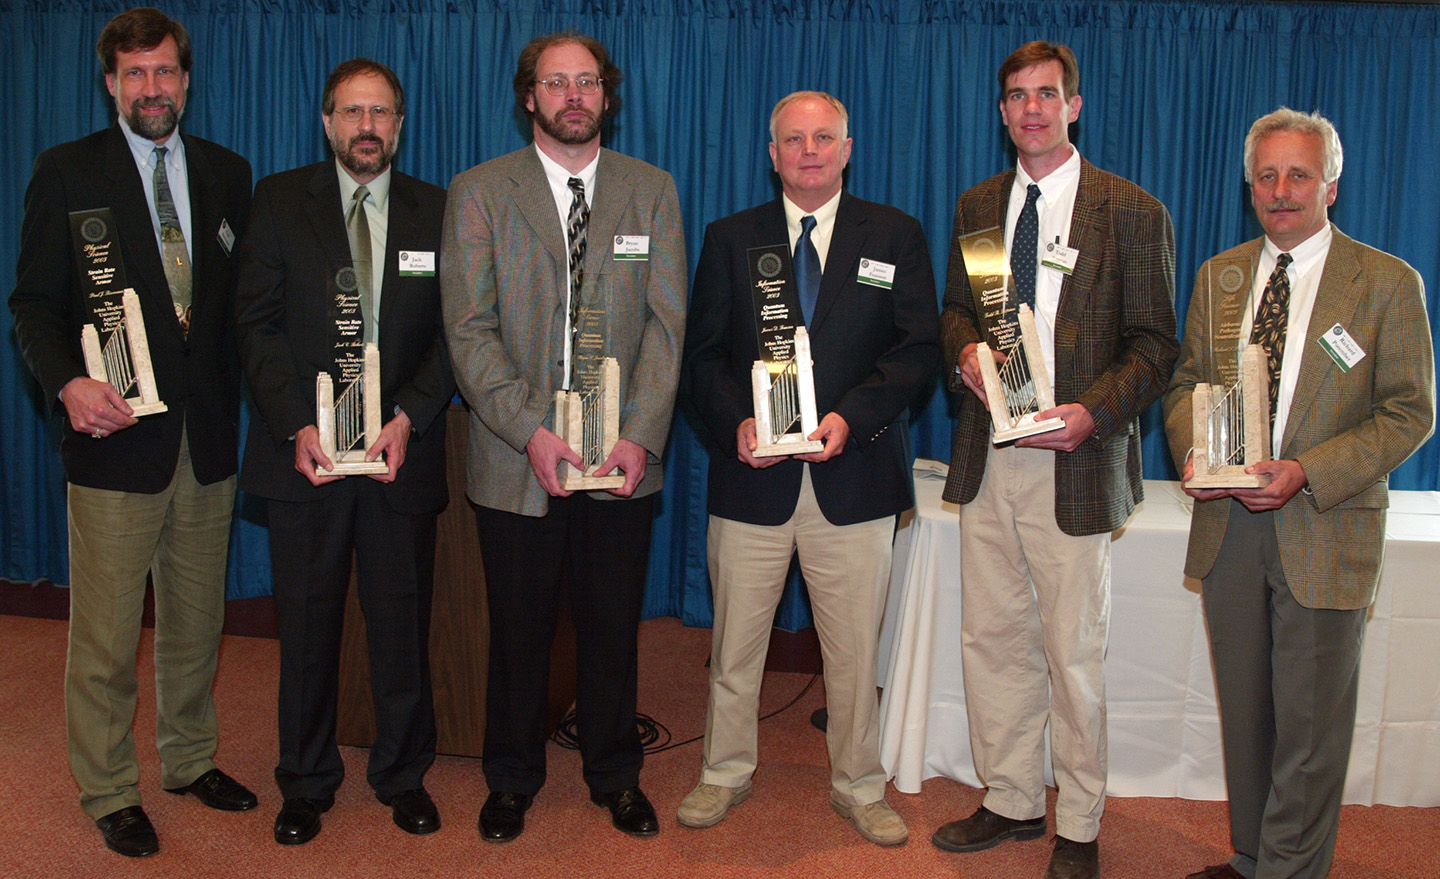 (from left) Paul Biermann, Jack Roberts, Bryan Jacobs, James Franson, Todd Pitman and Richard Potember